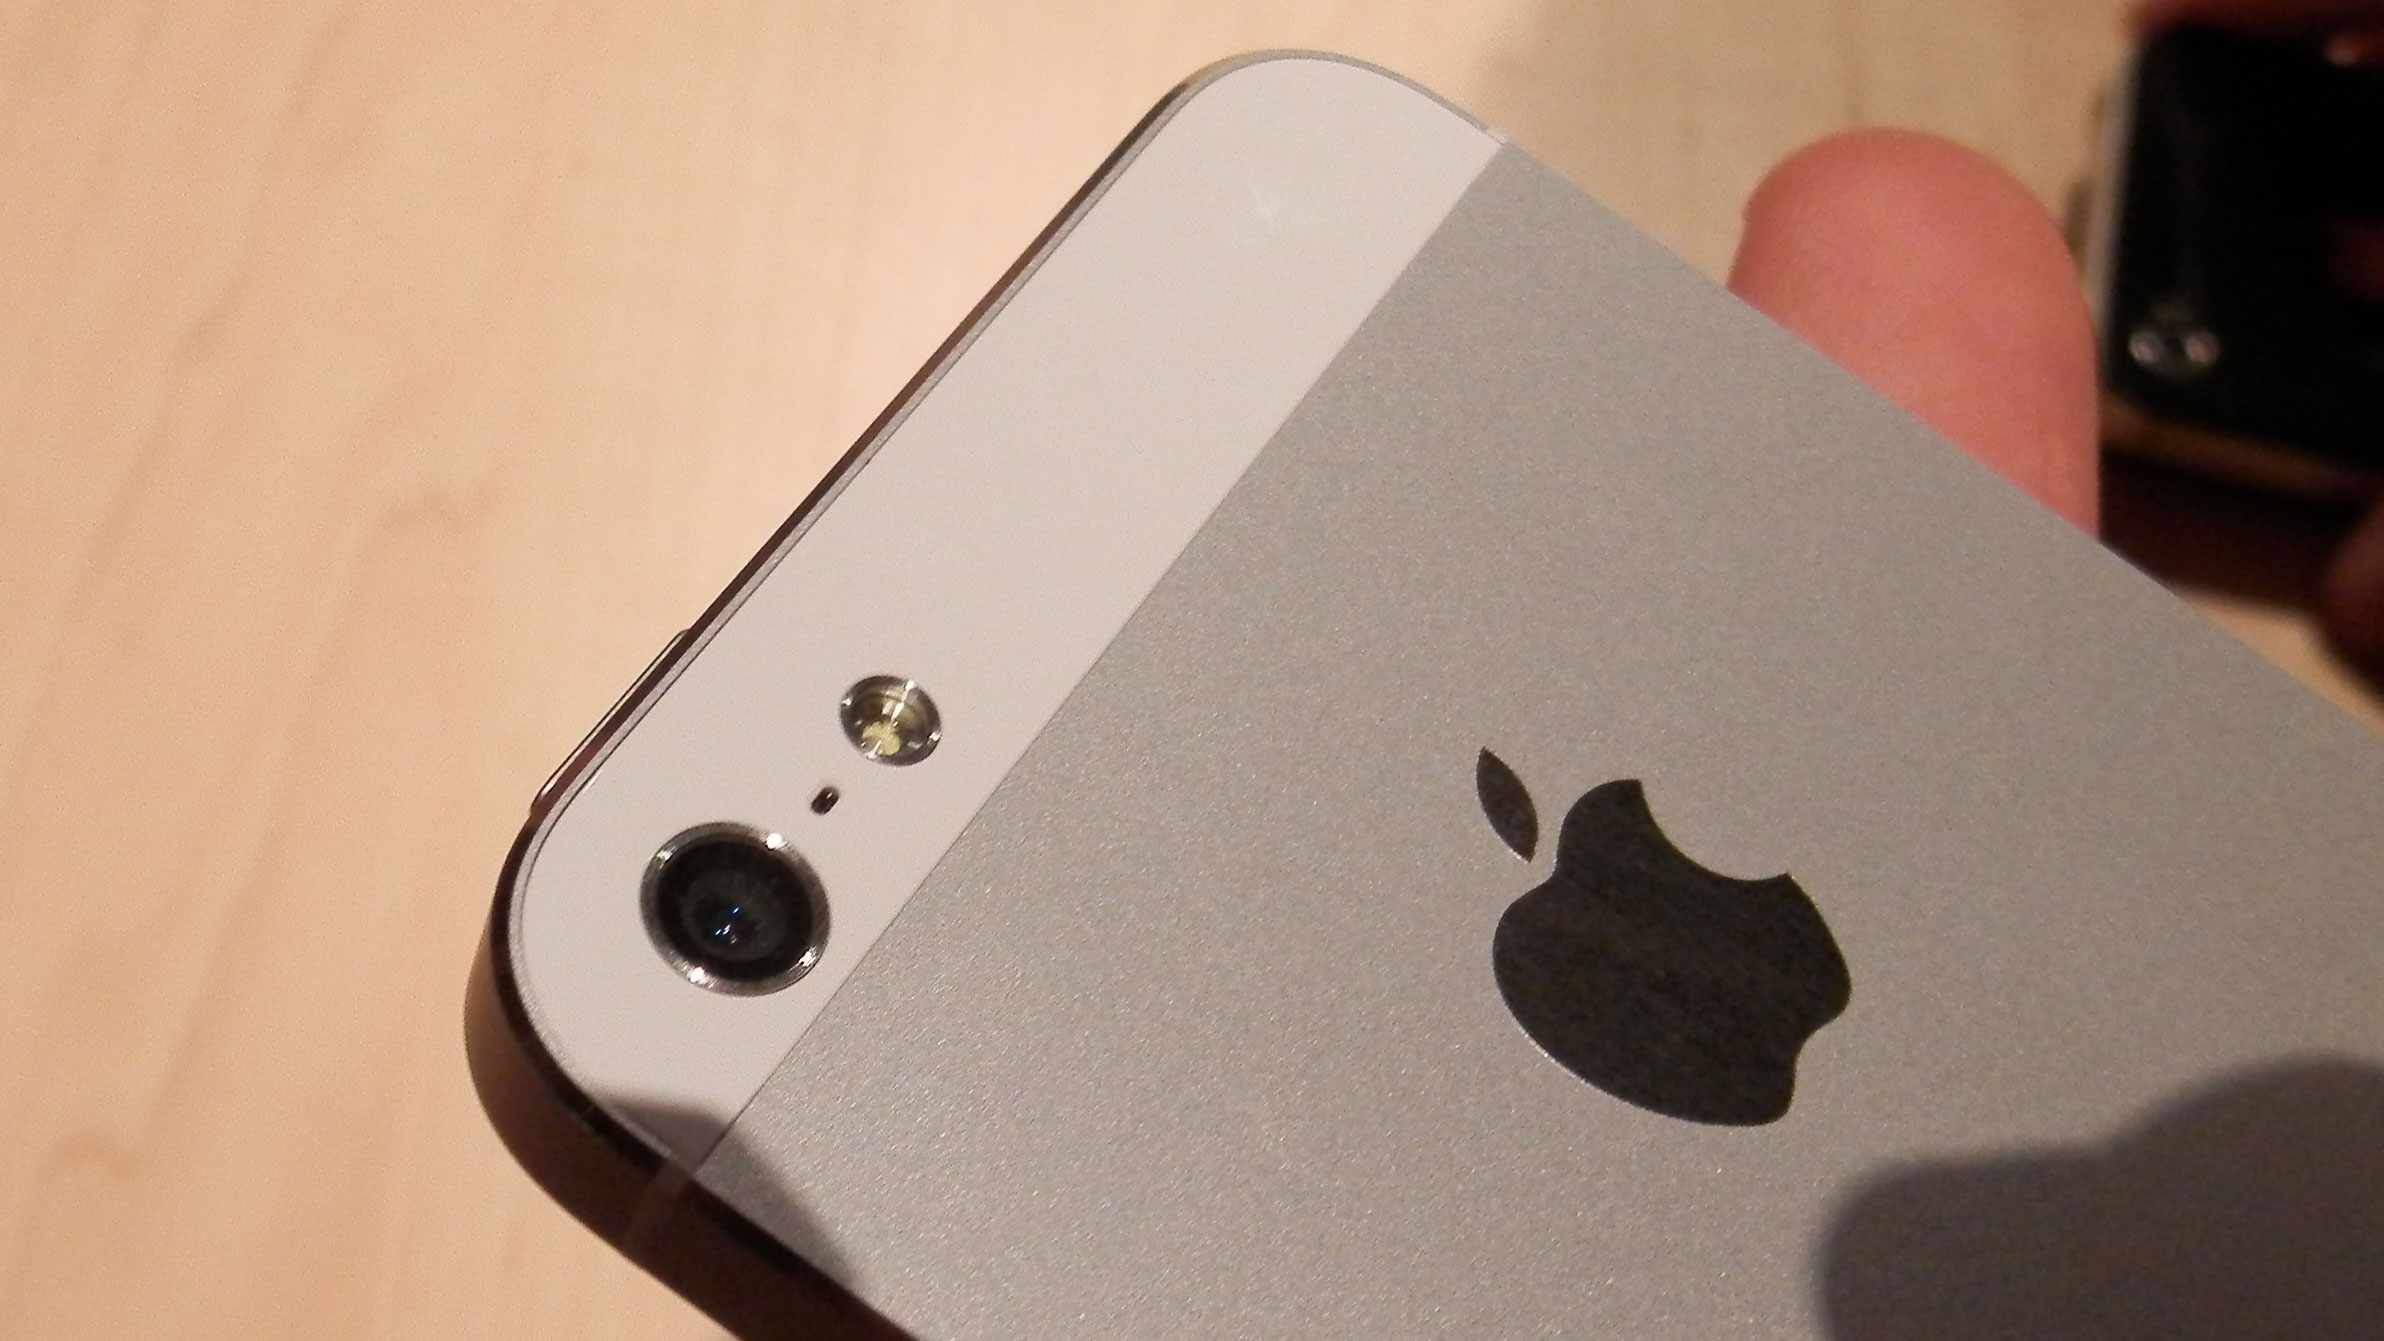 The Great Iphone 5 Debate Rages What Do You Think Techradar 